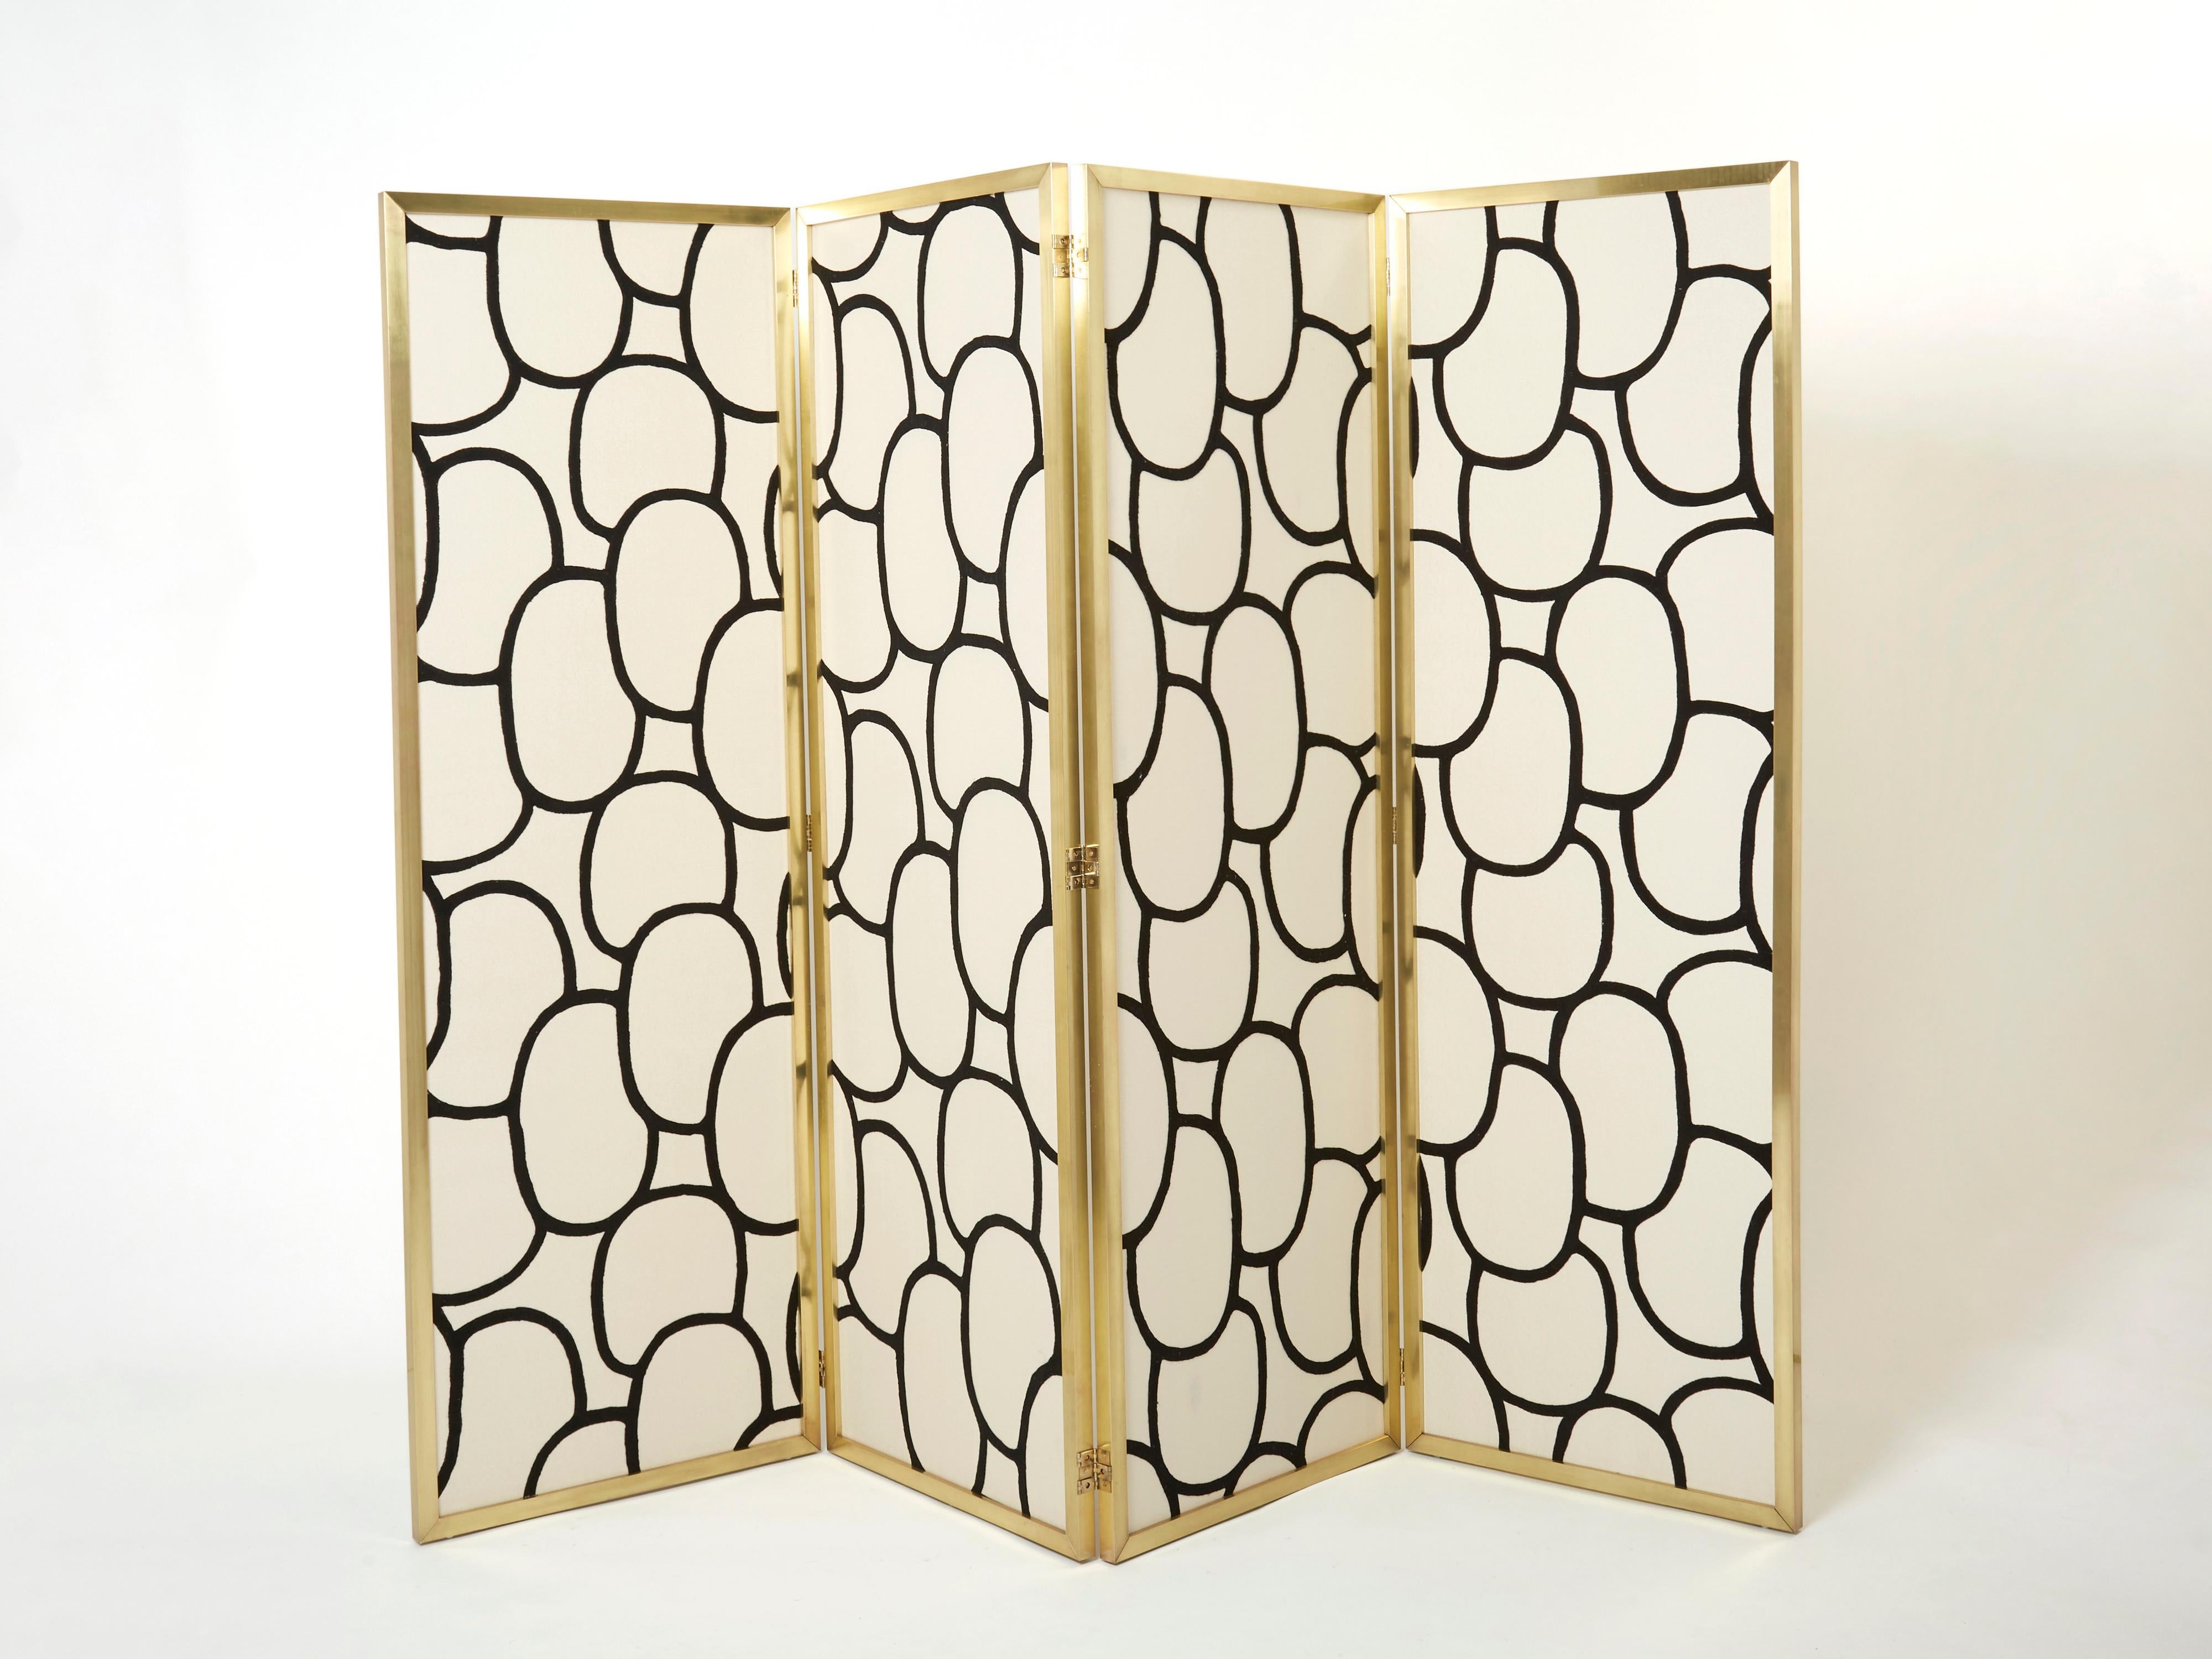 Unique 1970s four-panel screen room divider with solid polished brass structure and profile manufactured by Galerie Maison et Jardin in the early 1970s. The panels have been reupholstered with a wool and silk fabric from Fadini Borghi. The brass